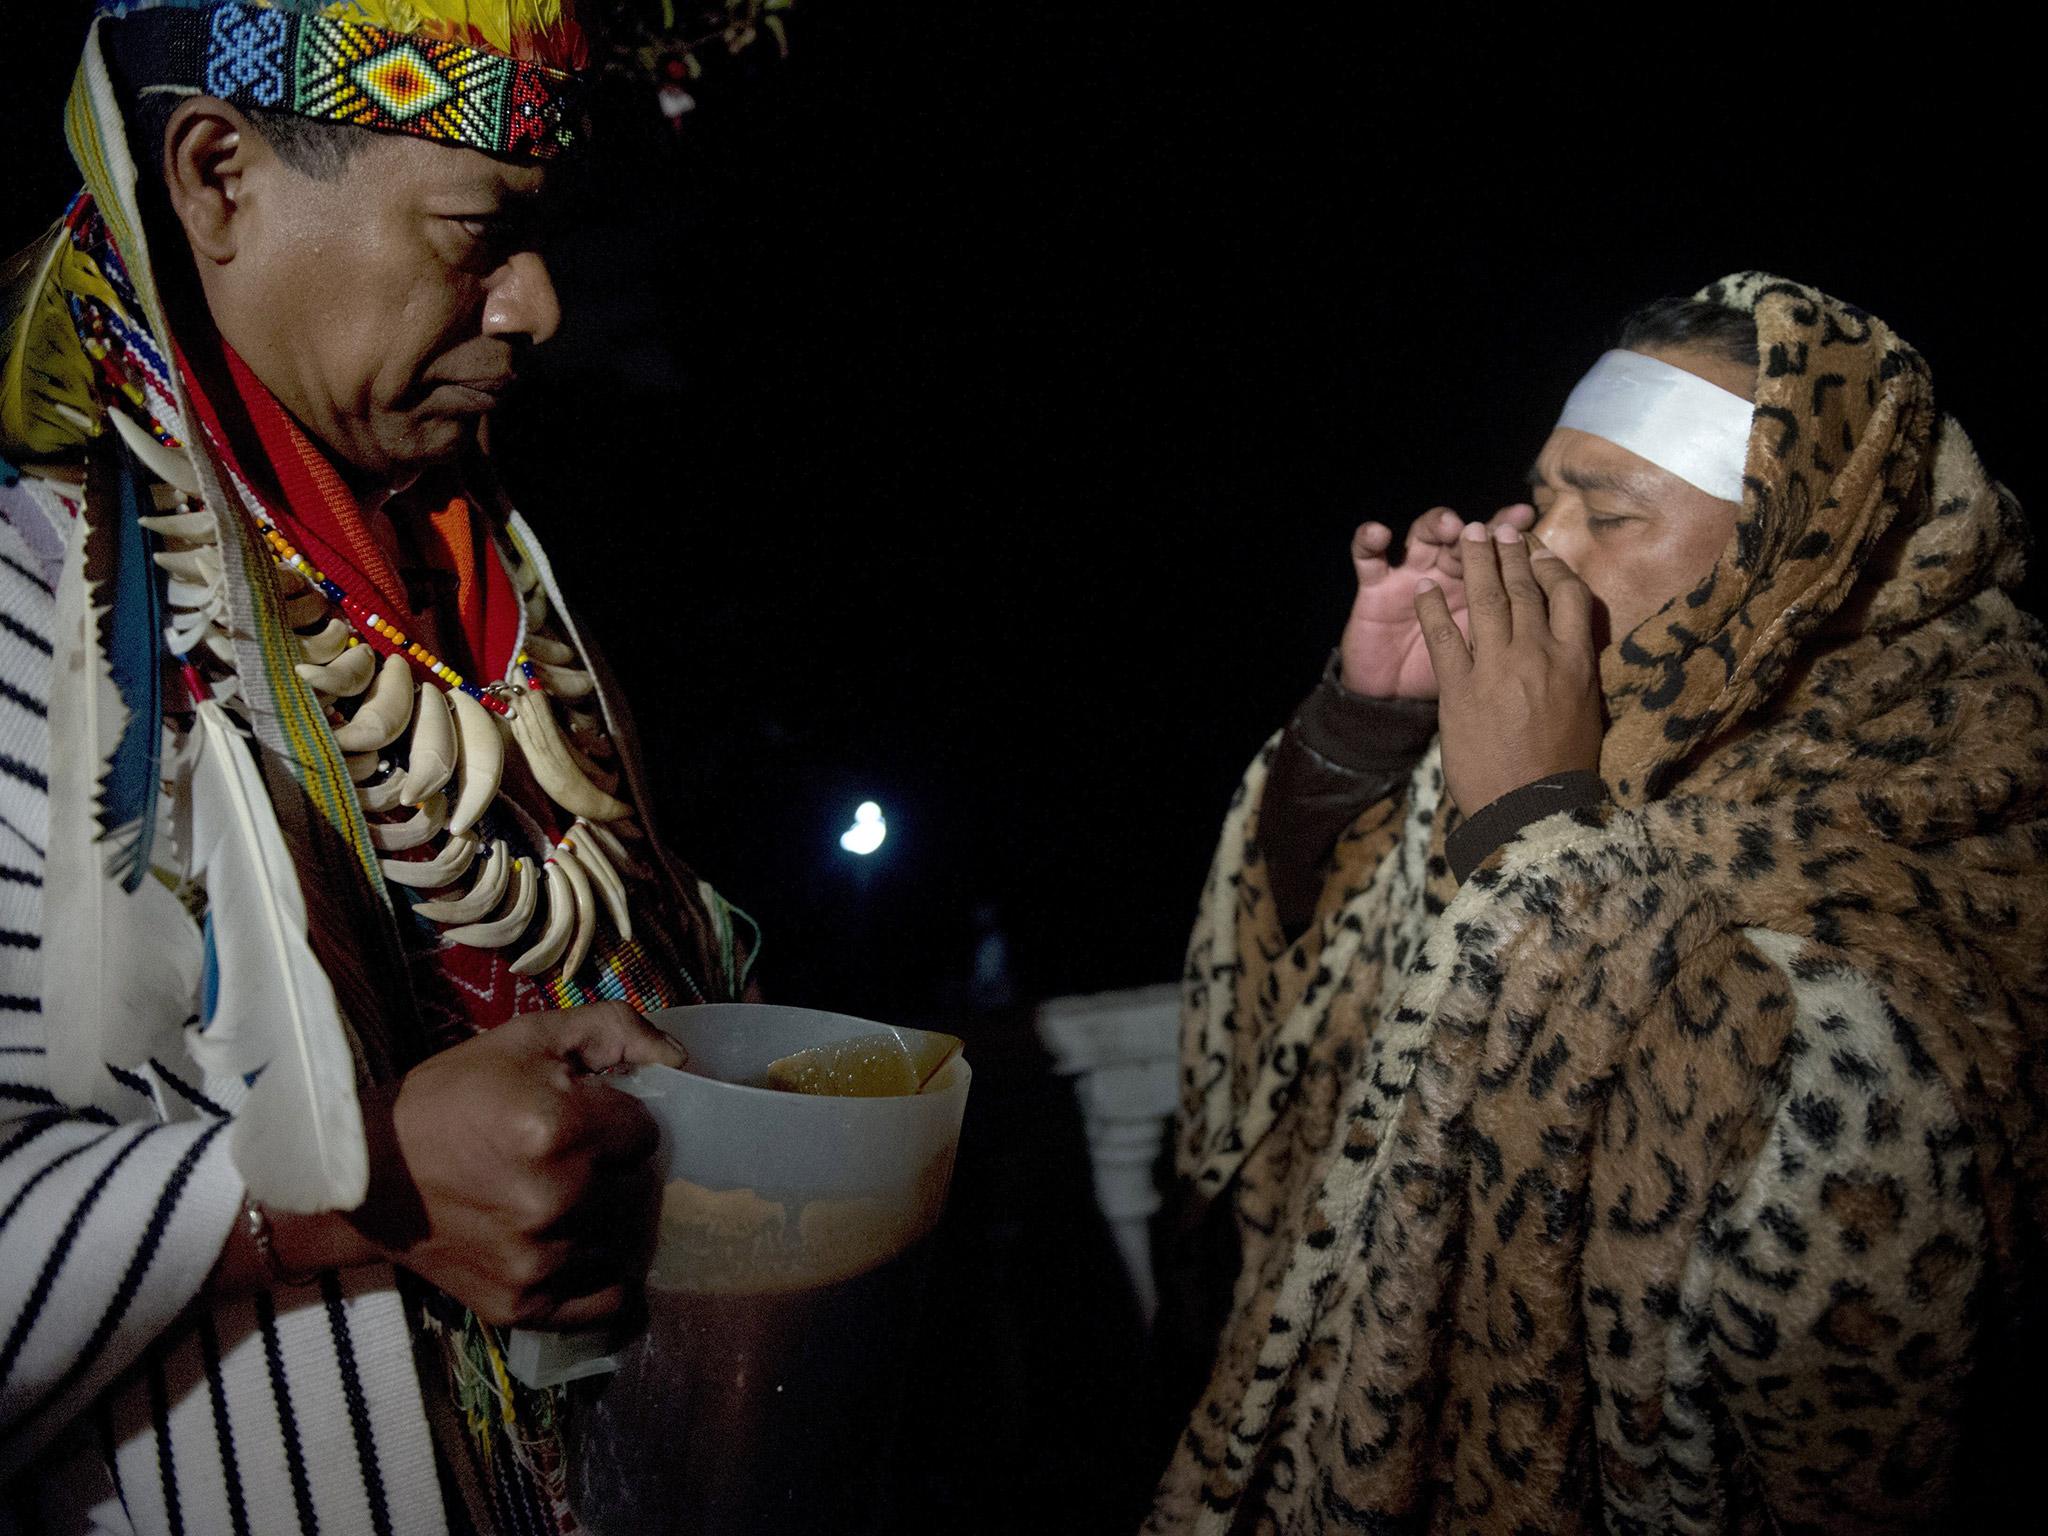 Ayahuasca being used during a ceremony in Columbia 